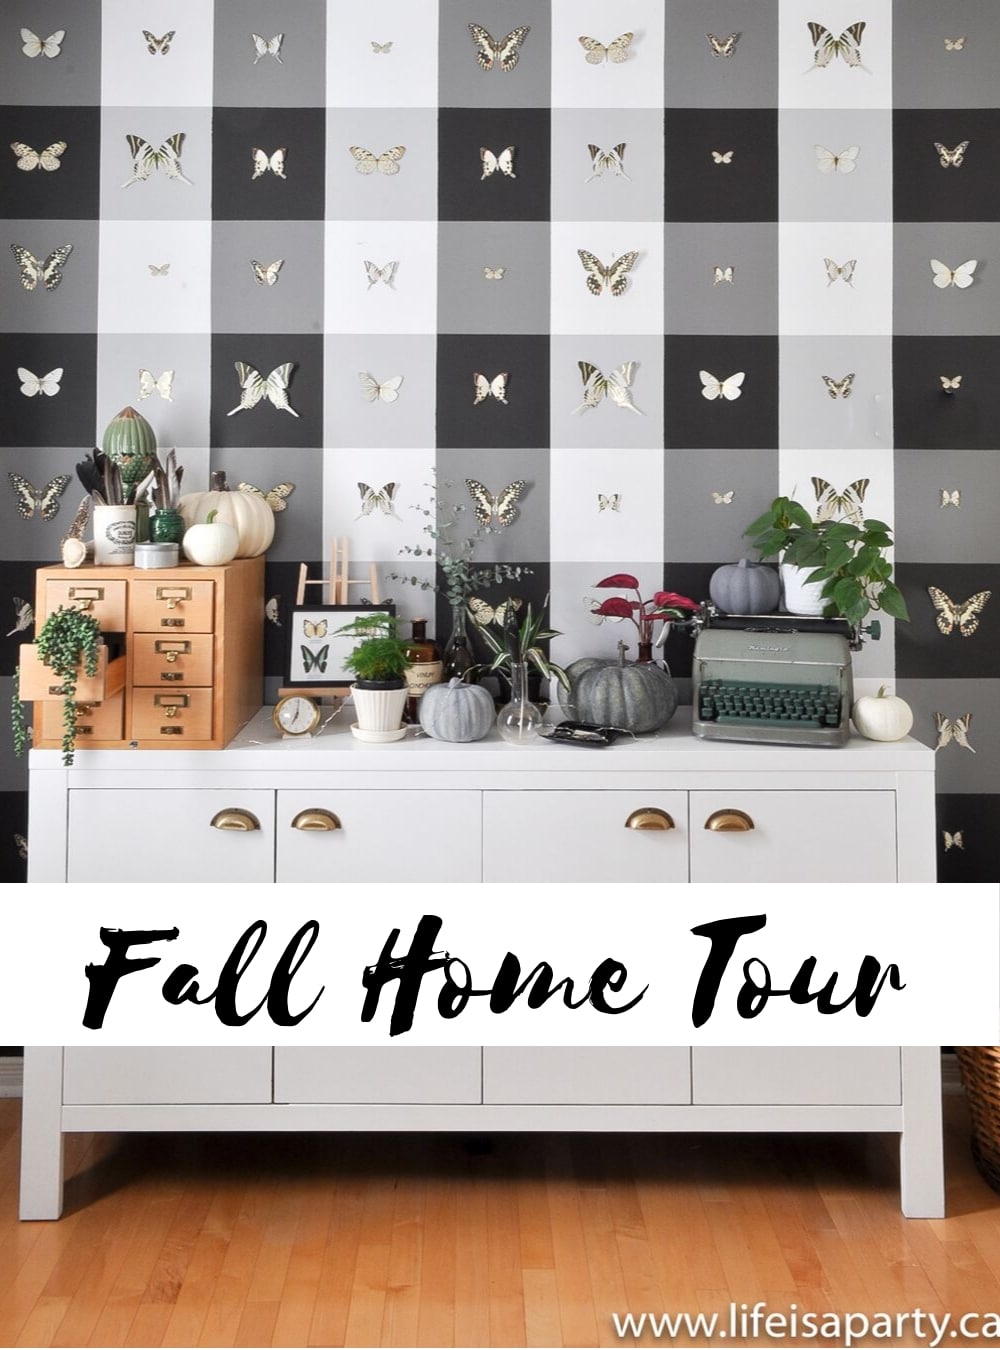 Fall Home Tour: Vintage Botanical Scientific Decor with Boho Maximalist Influence means lots of plants, insects, and pumpkins.